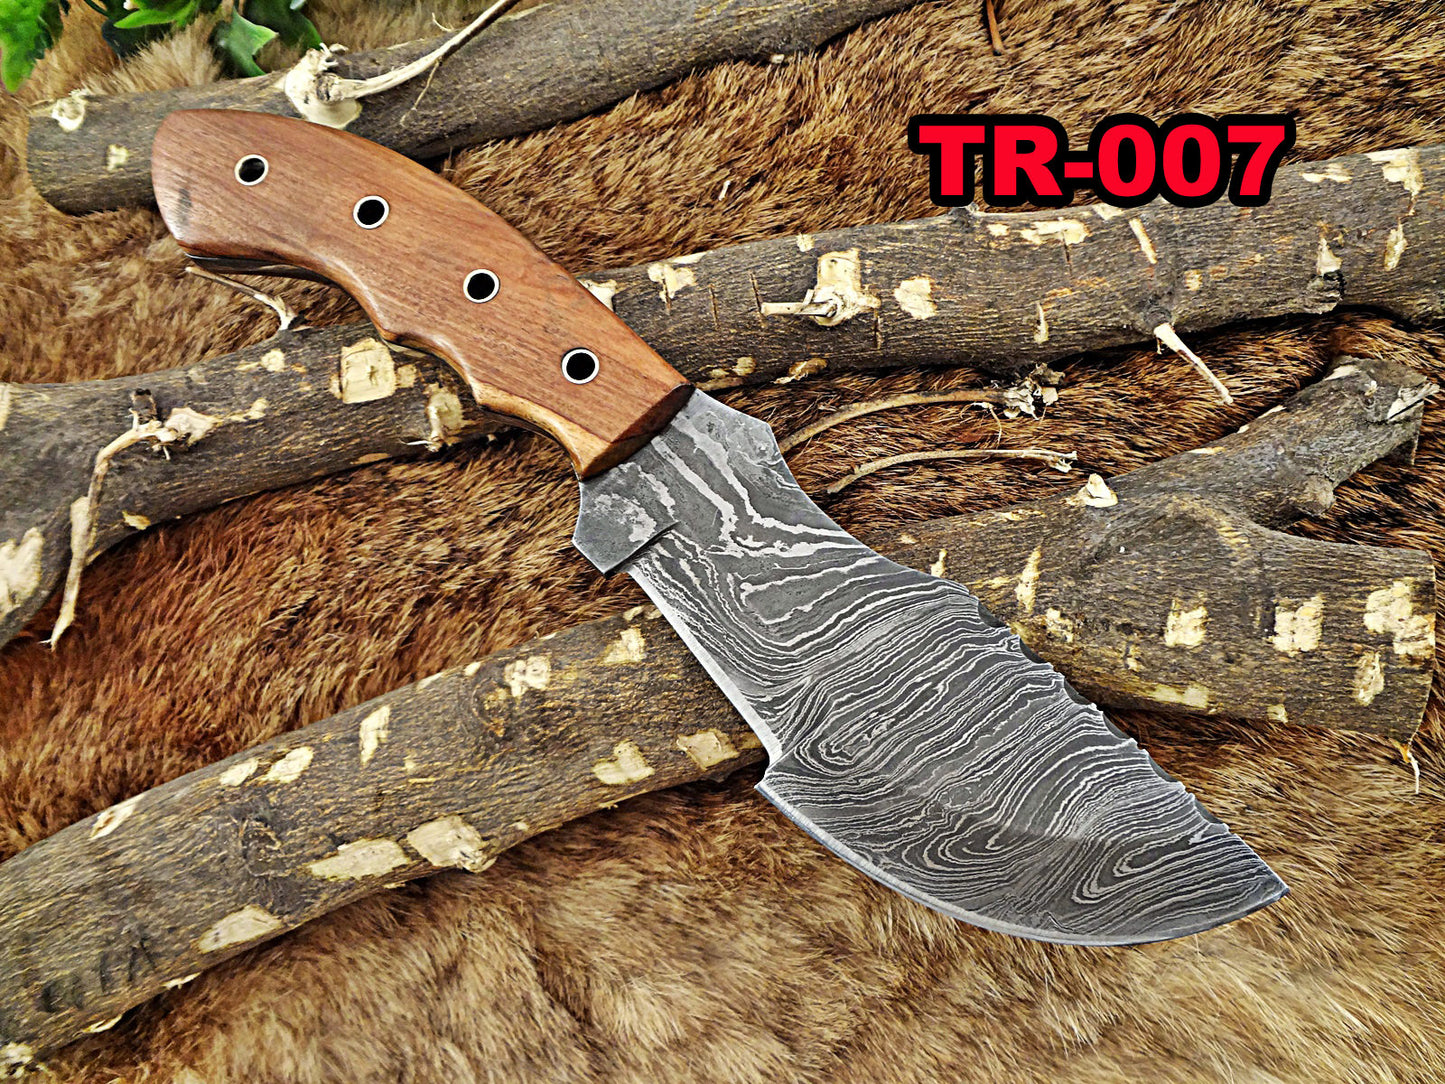 10"Long tracker knife hand forged twist pattern full tang Damascus steel, Natural Rose wood with pipe hole scale, Cow hide leather sheath